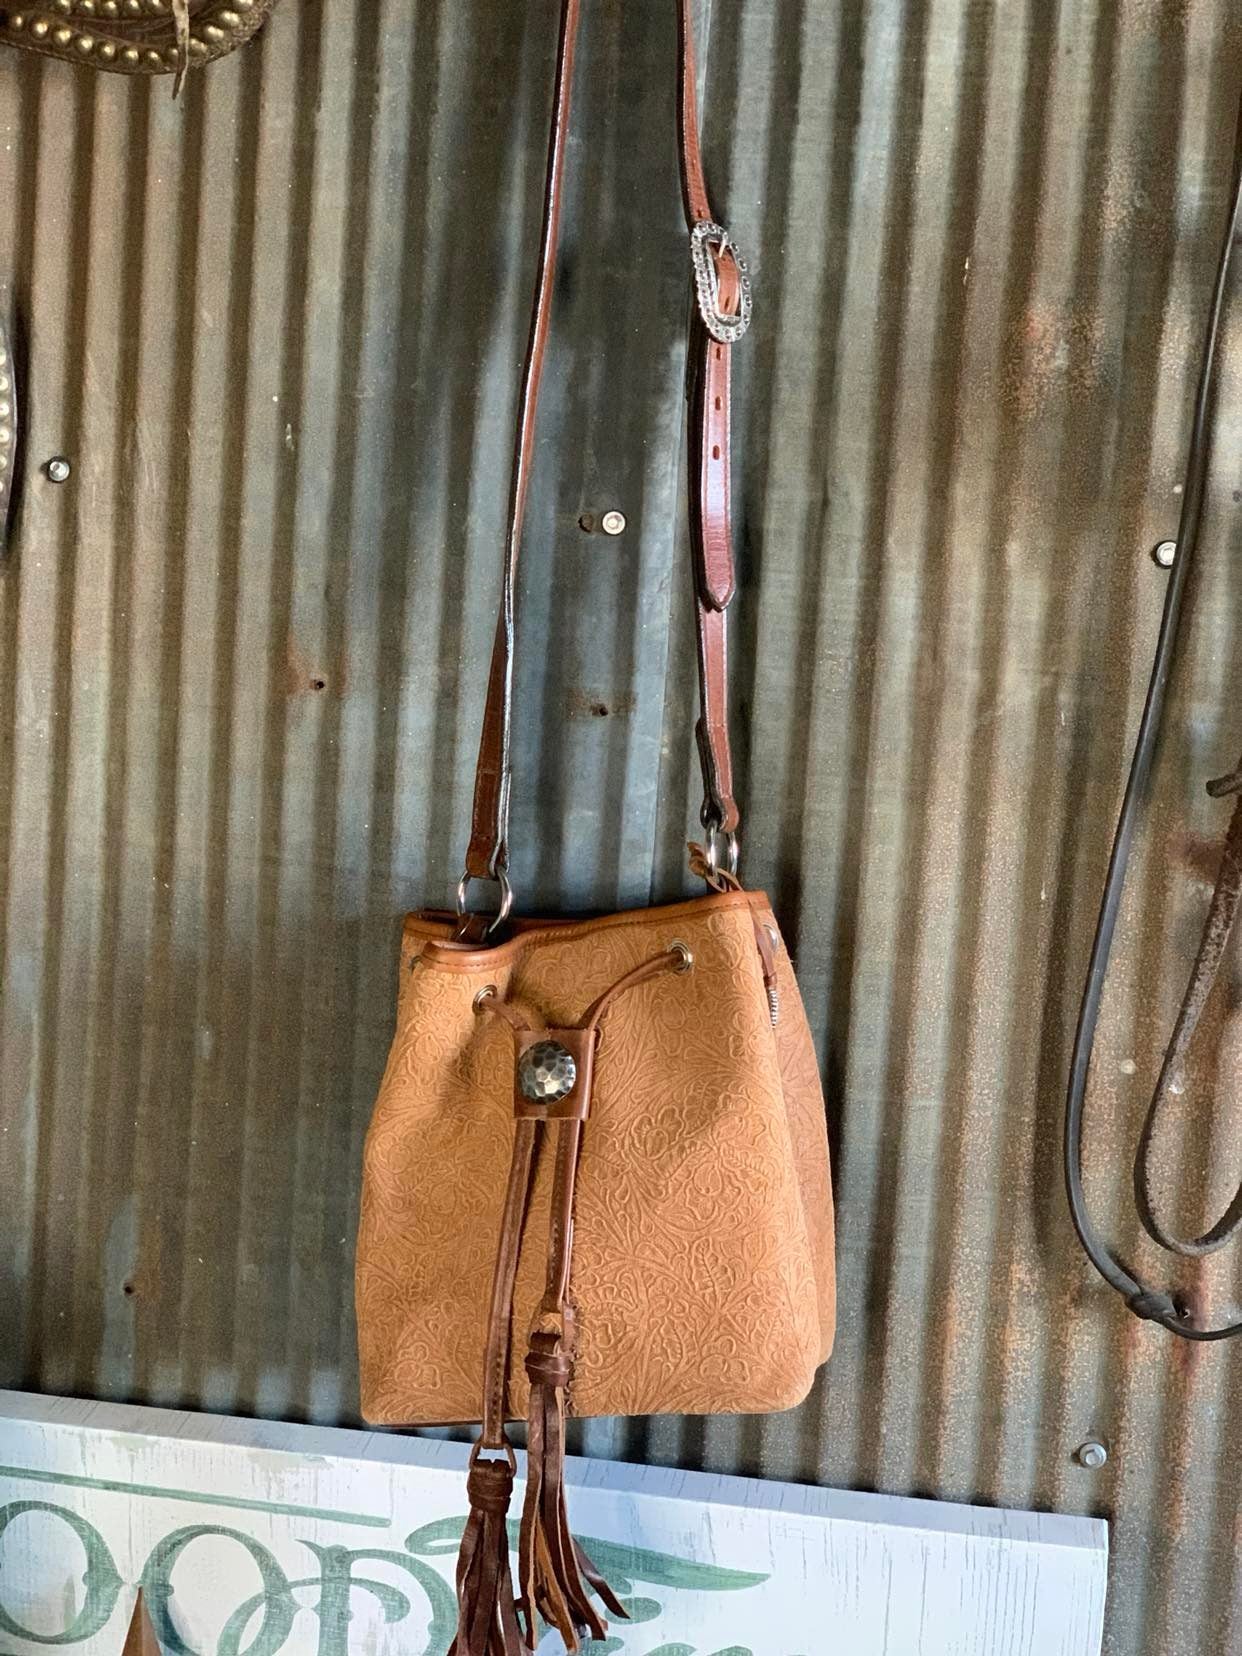 Double J Drawstring Pouch Purse-Handbags-DOUBLE J SADDLERY-Lucky J Boots & More, Women's, Men's, & Kids Western Store Located in Carthage, MO